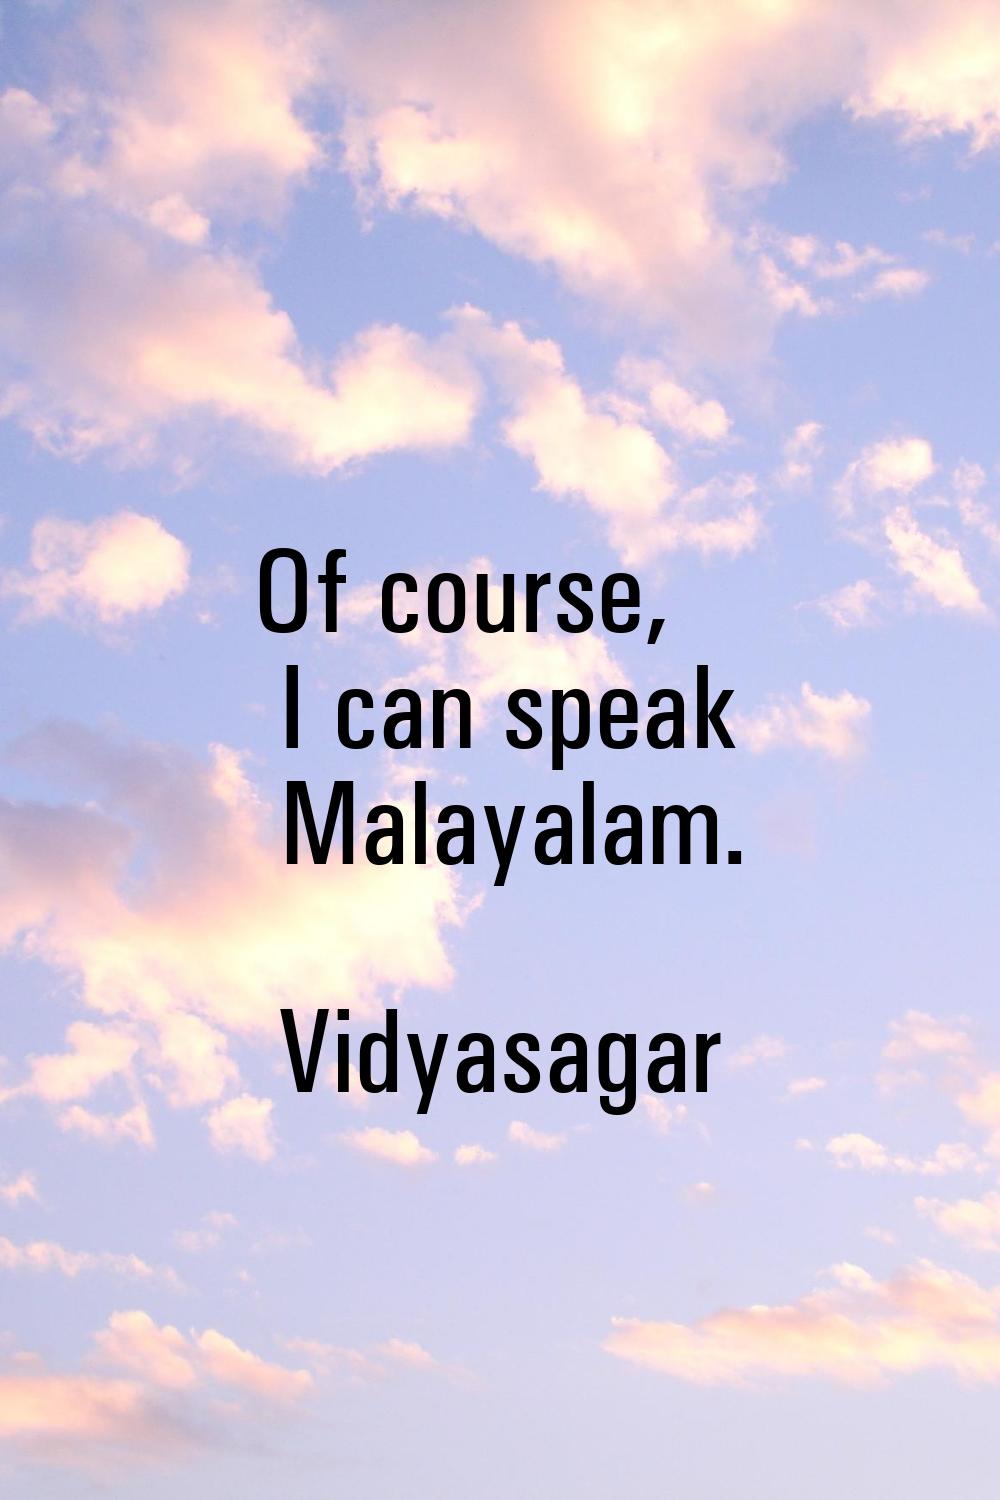 Of course, I can speak Malayalam.